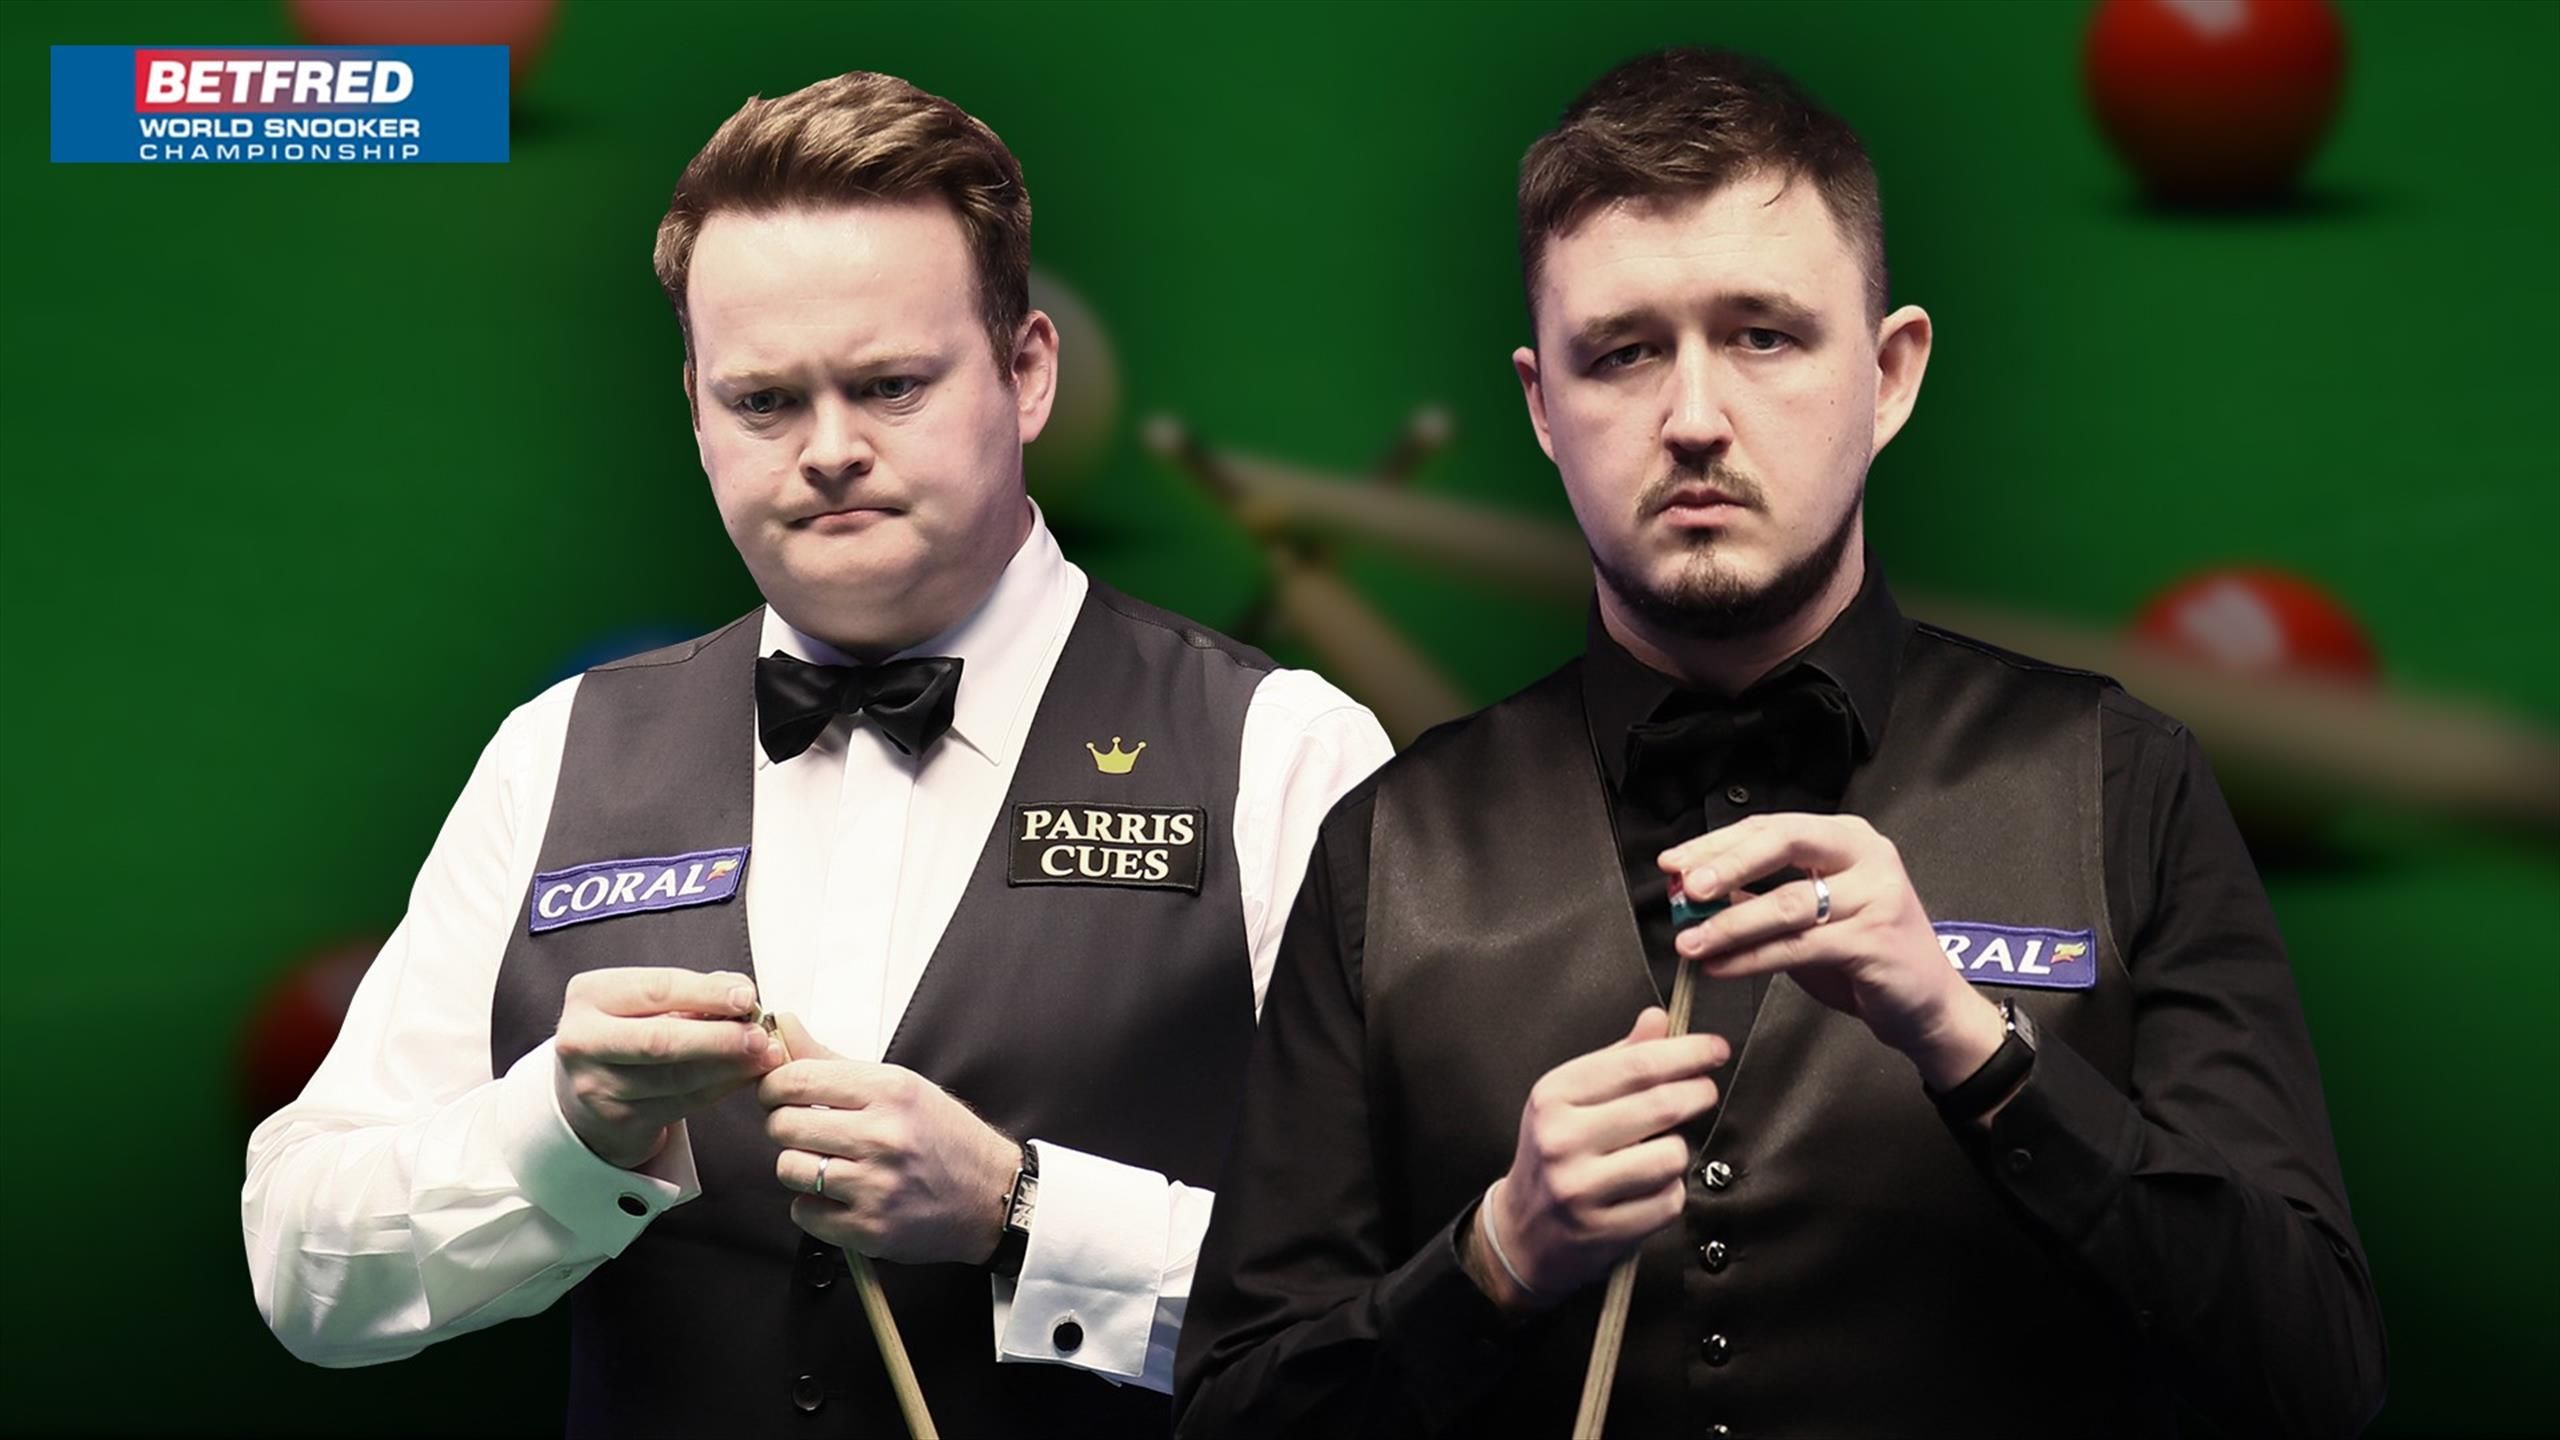 World Snooker Championship 2021 Order of play, live scores and results from the Crucible Theatre